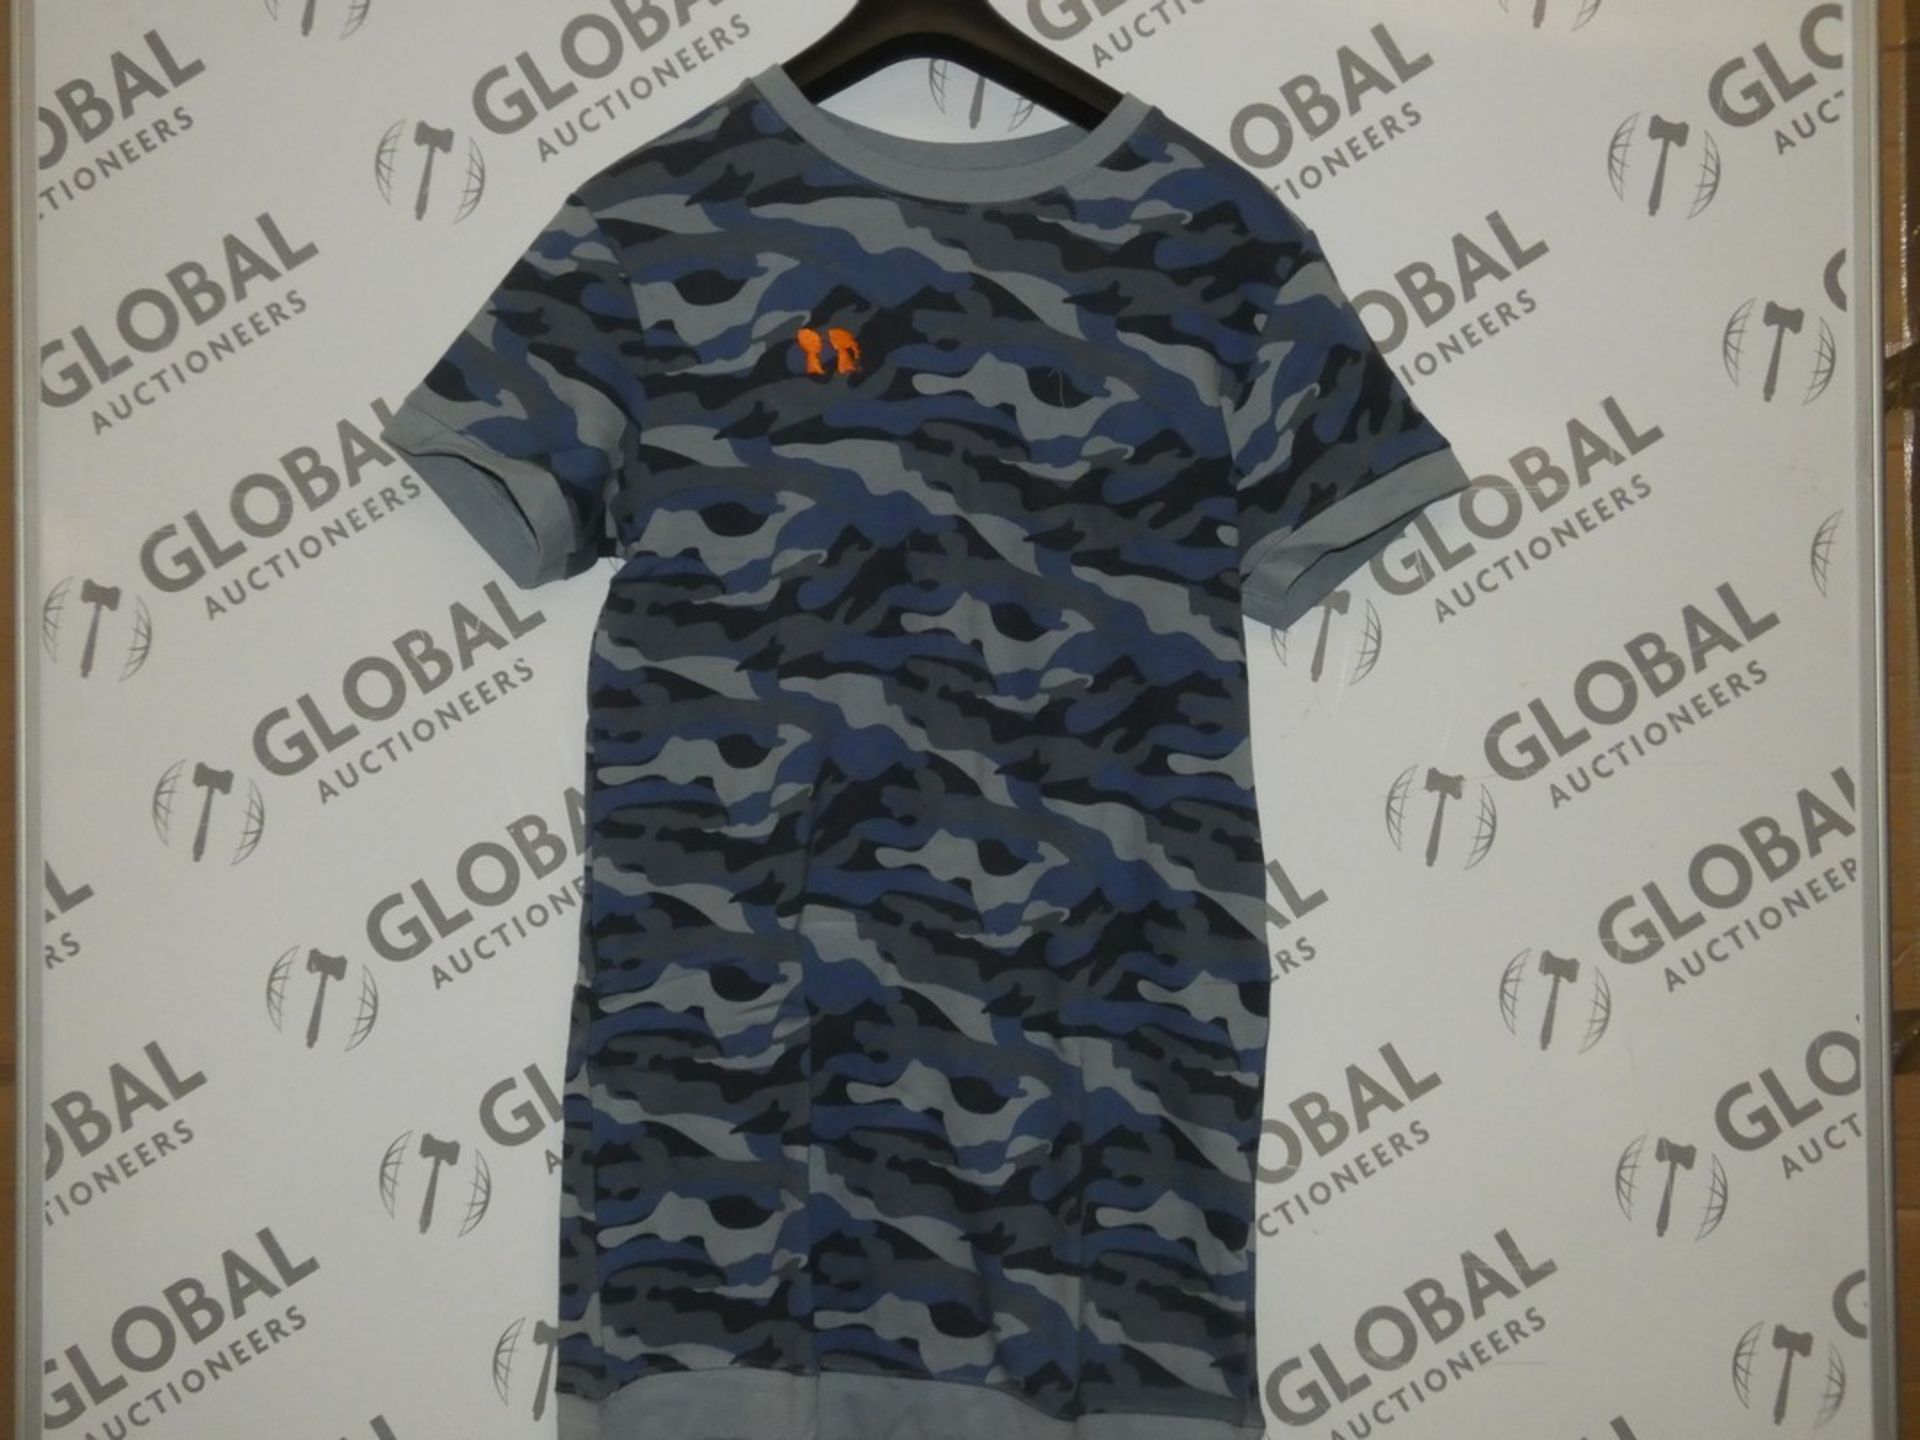 Brand New Boy Meets Girl Blue Camo Size Large T-shirts RRP £29.99 (503)